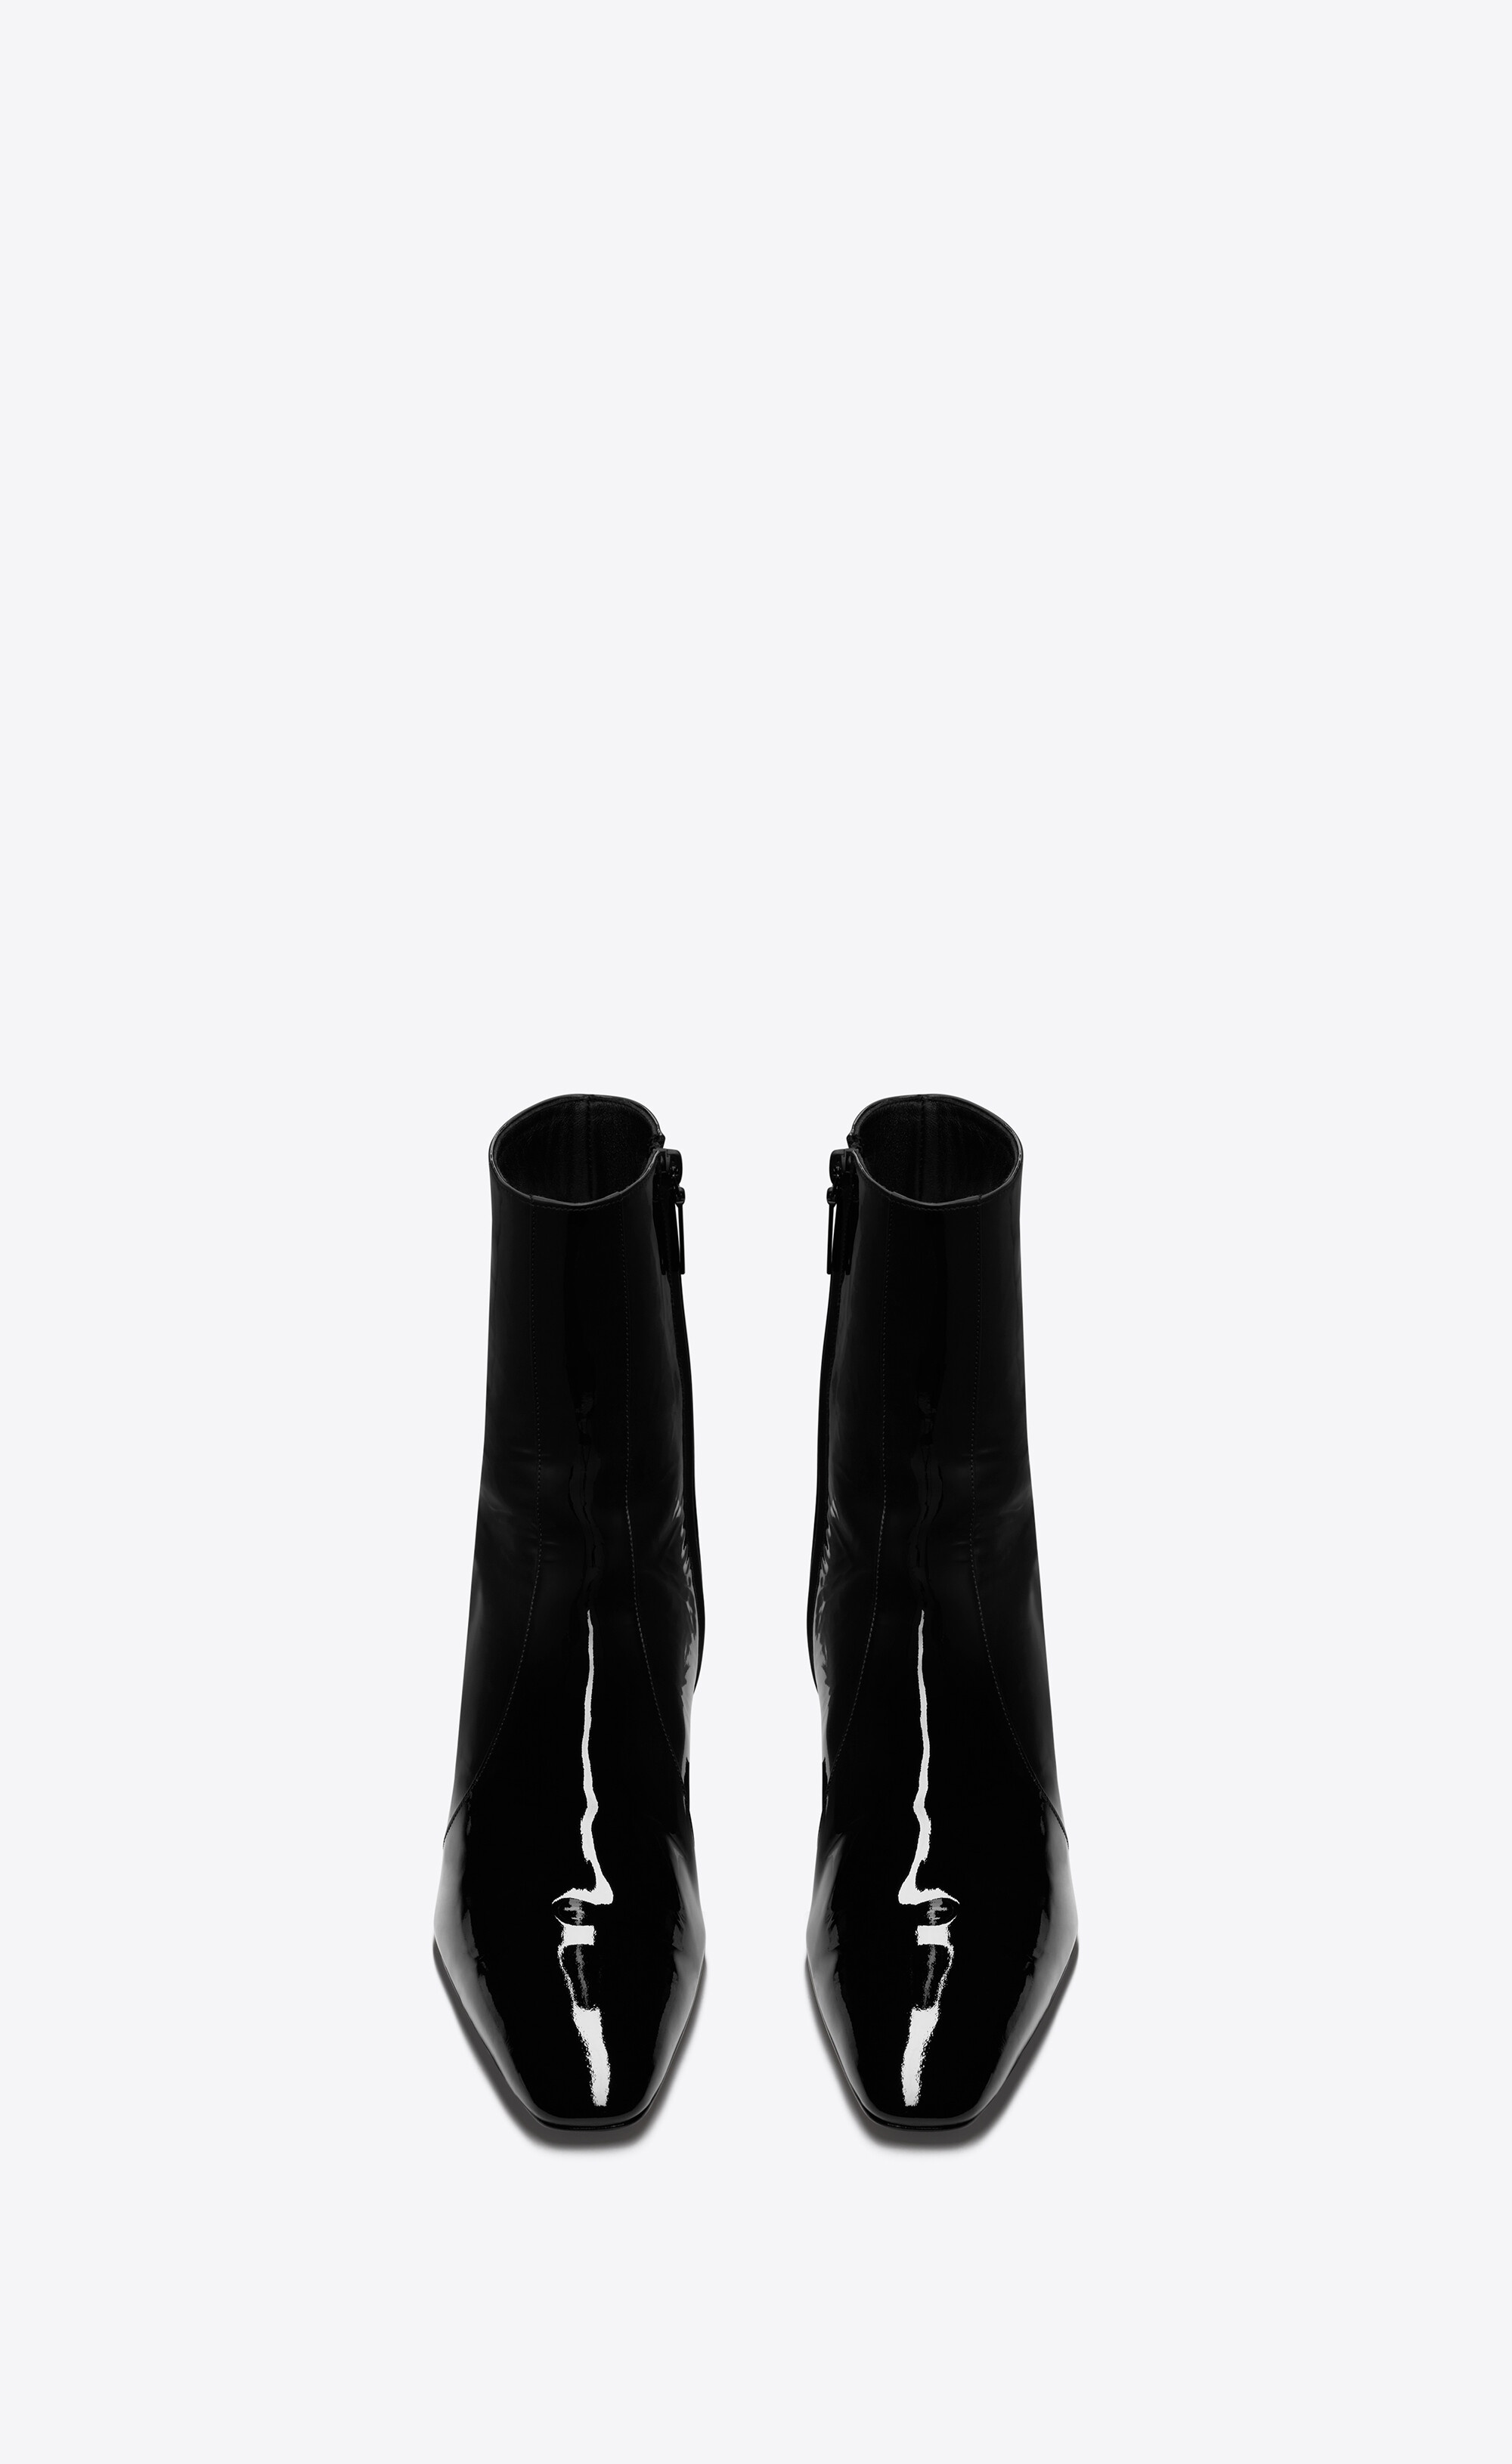 xiv zipped boots in patent leather - 2